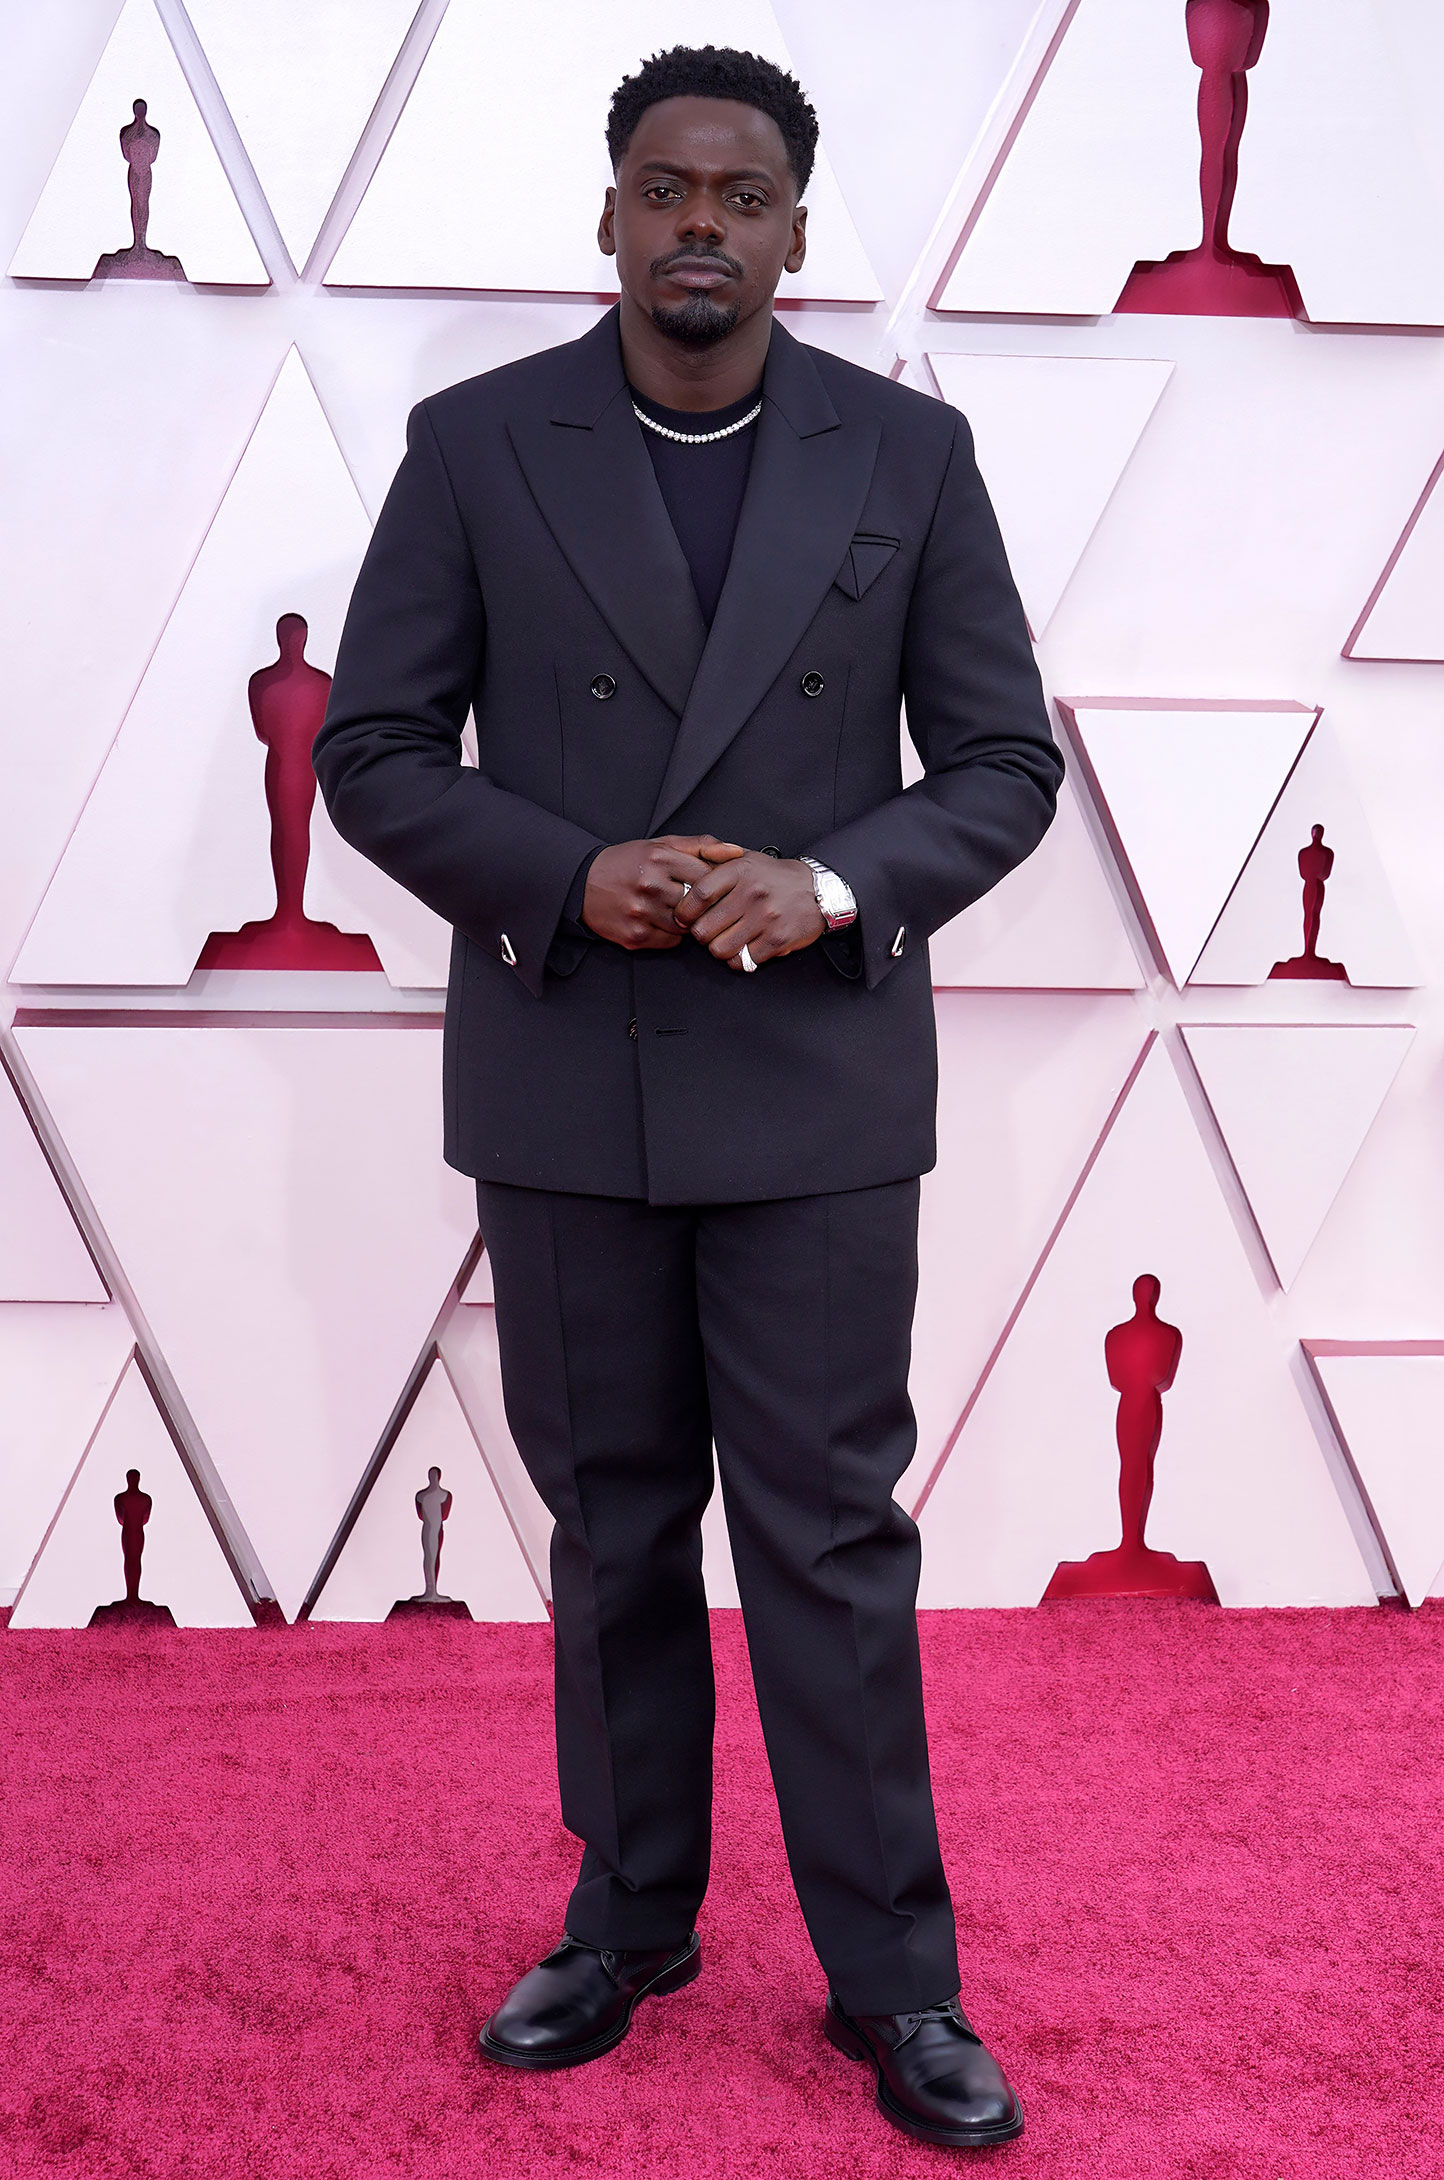 Oscars 2021: Hottest Men in Tuxedos, Suits